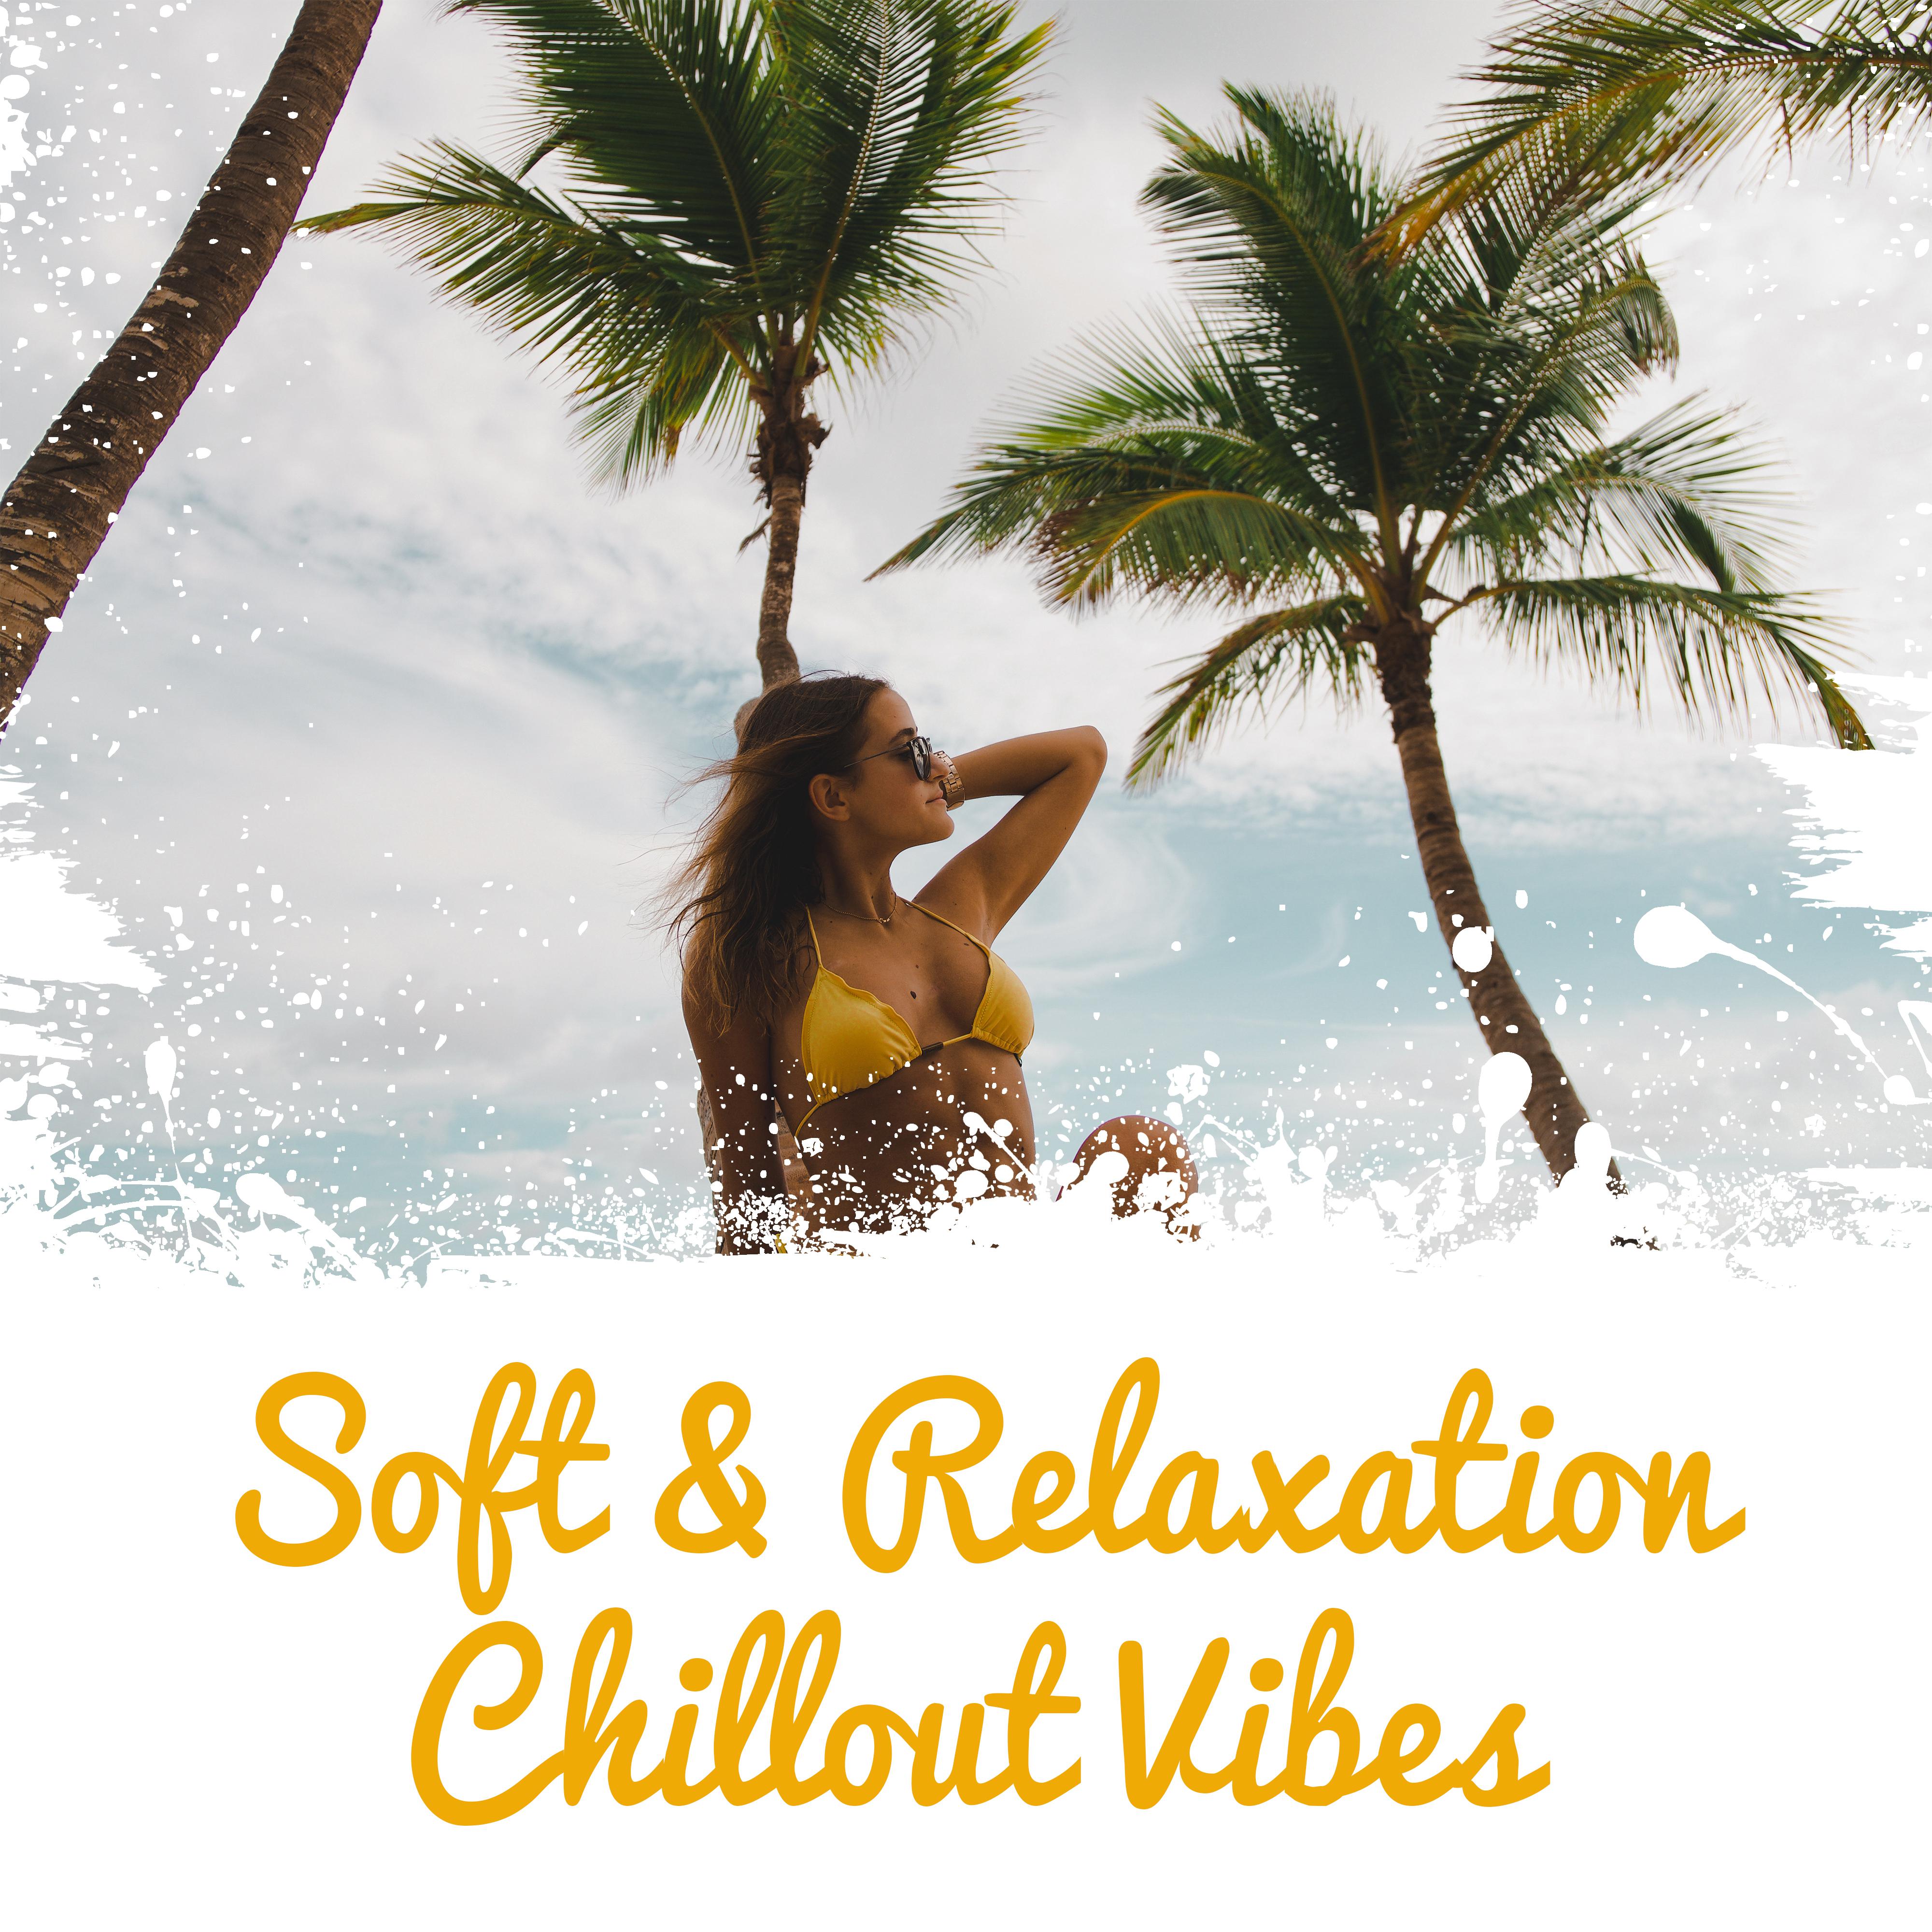 Soft & Relaxation Chillout Vibes